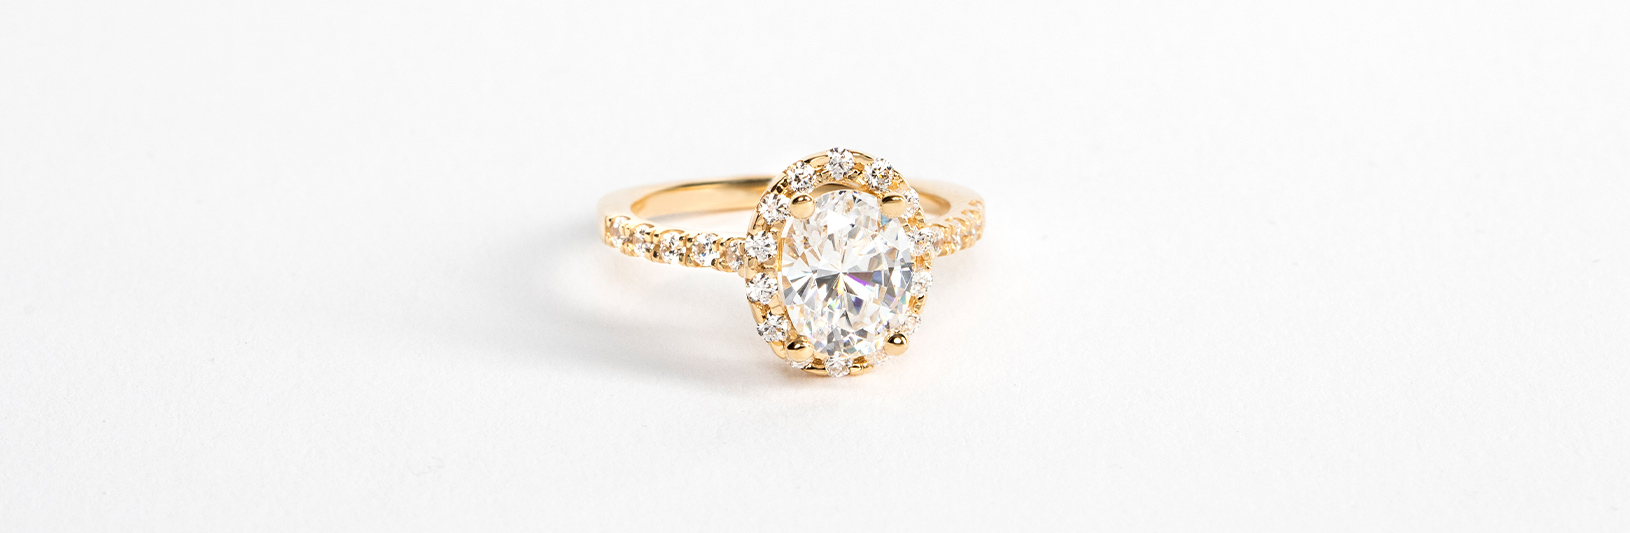 A classic oval cut simulated diamond in an accented setting